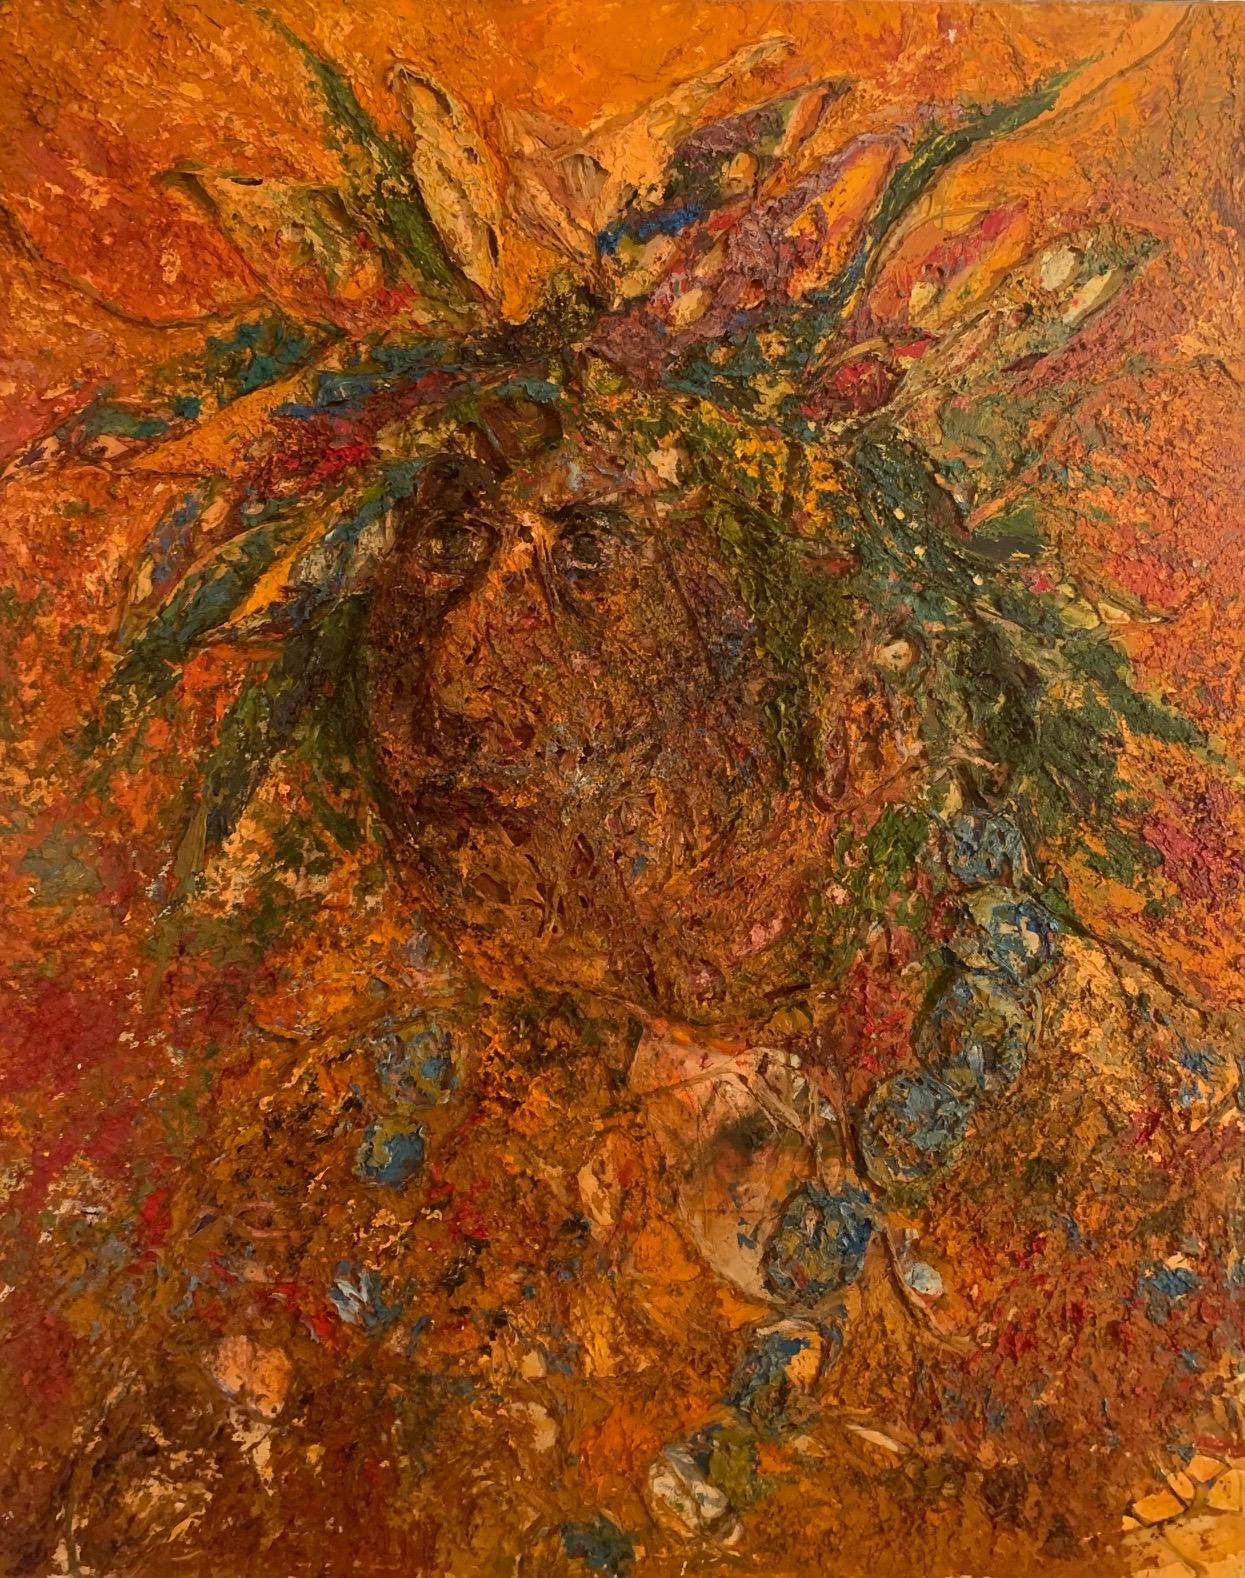 “Dooling’s ‘A Maya Woman’ is a striking testament to the artist’s mastery of mixed media, capturing the vibrant essence of a Maya woman with intricate line work and a symphony of colors. Bright orange, red, and yellow hues blend harmoniously to